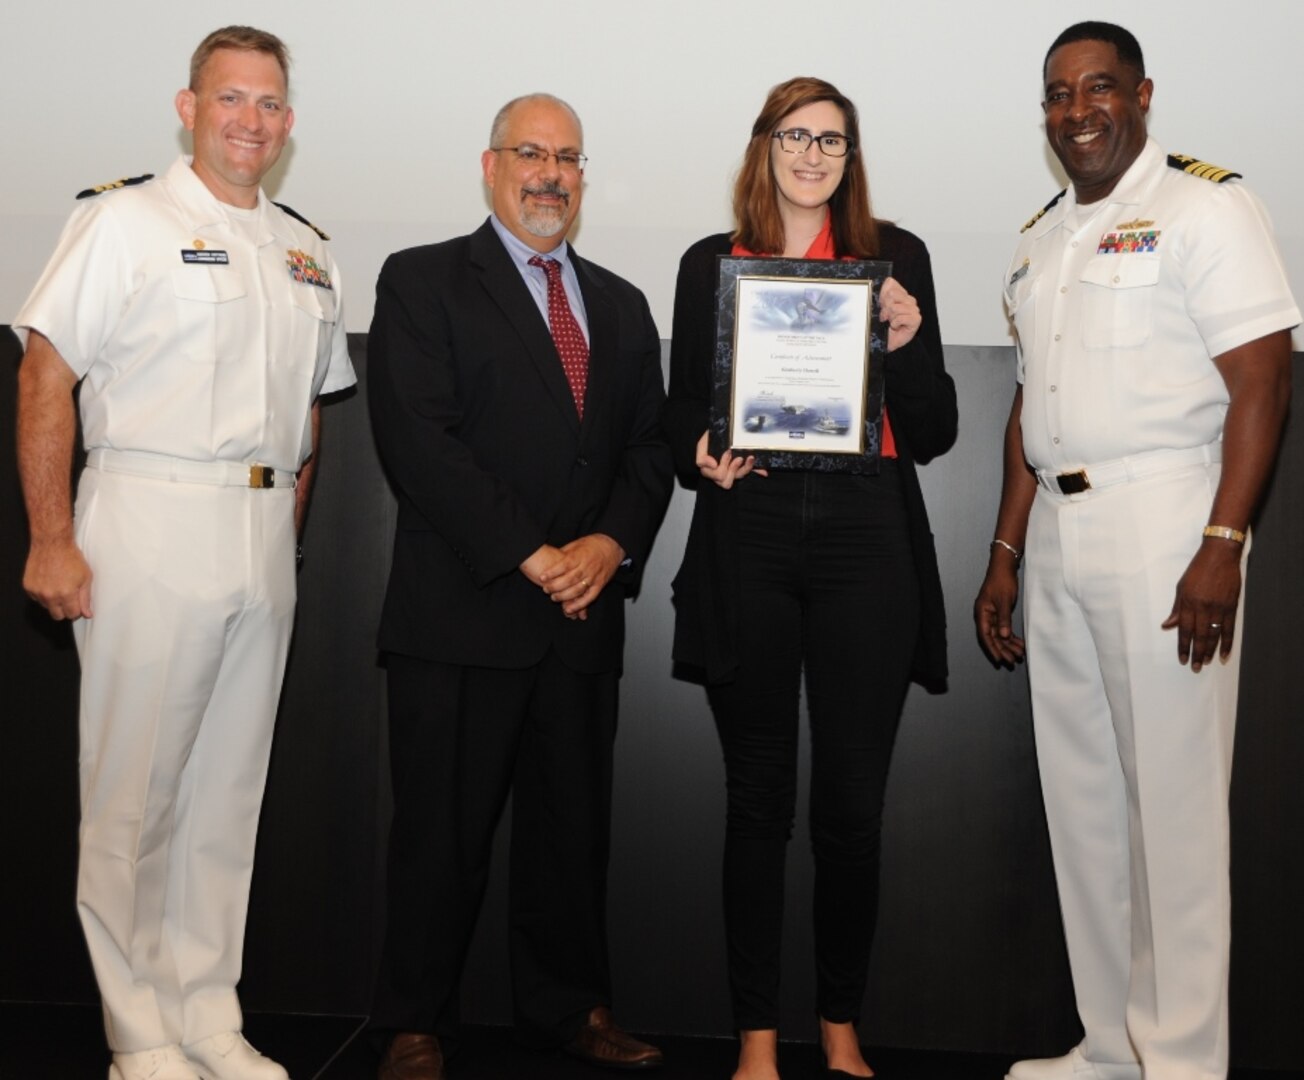 IMAGE: DAHLGREN, Va. - Kimberly Howell receives her certificate of achievement from Naval Surface Warfare Center Dahlgren Division (NSWCDD) Technical Director John Fiore, NSWCDD Commanding Officer Capt. Godfrey 'Gus' Weekes, right, and Combat Direction Systems Activity Dam Neck Commanding Officer Cmdr. Andrew Hoffman at the 2017 NSWCDD academic awards ceremony. Howell was recognized for completing her bachelor's in mathematics from Virginia Tech, and commended for her commitment to personal and professional development.